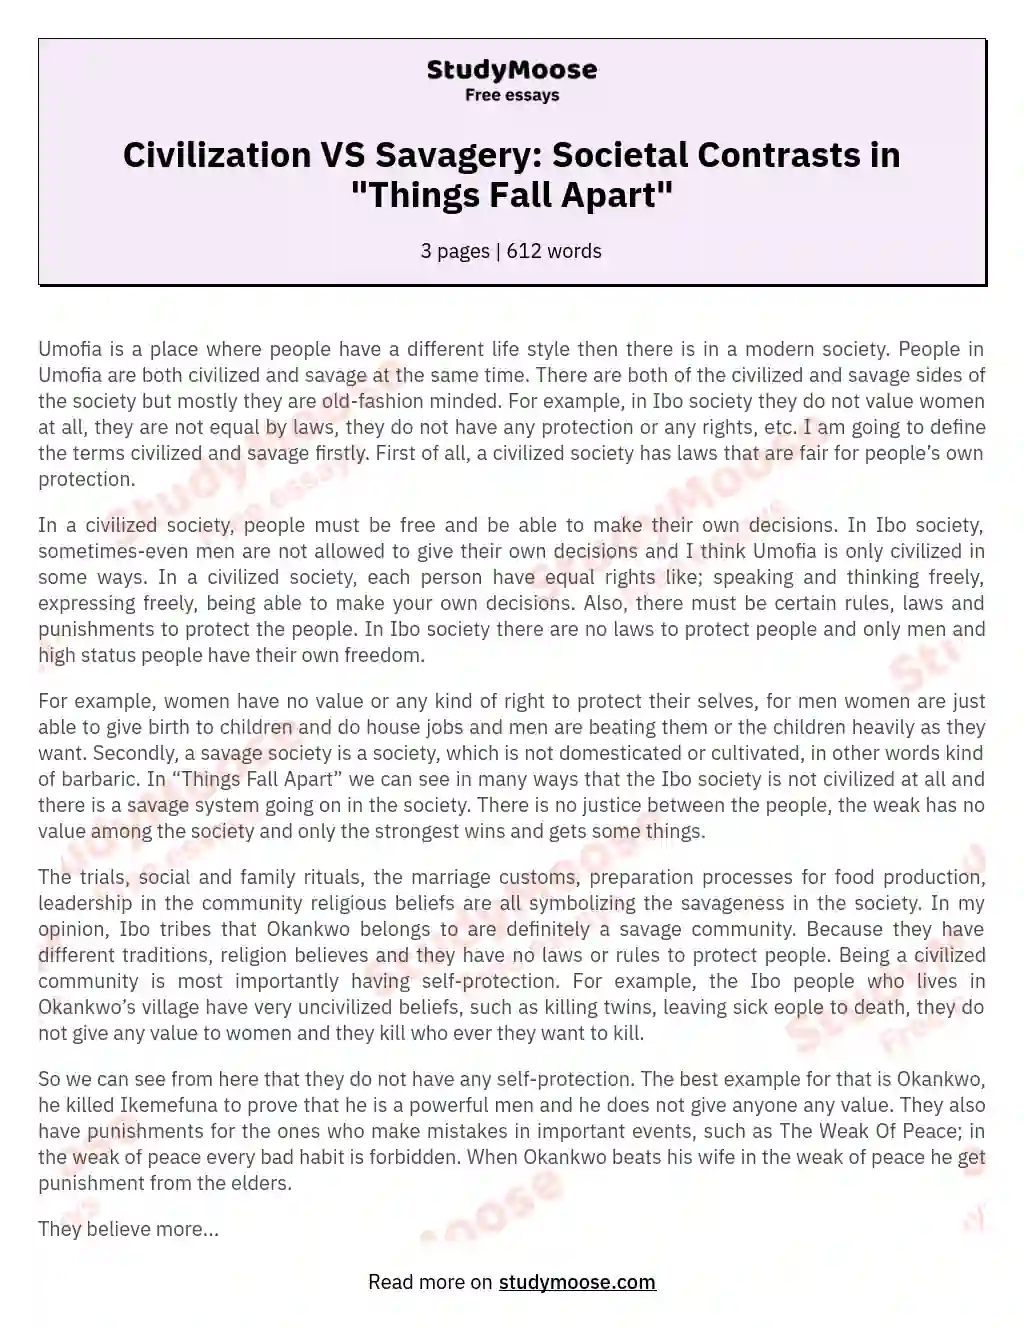 Civilization VS Savagery: Societal Contrasts in "Things Fall Apart" essay